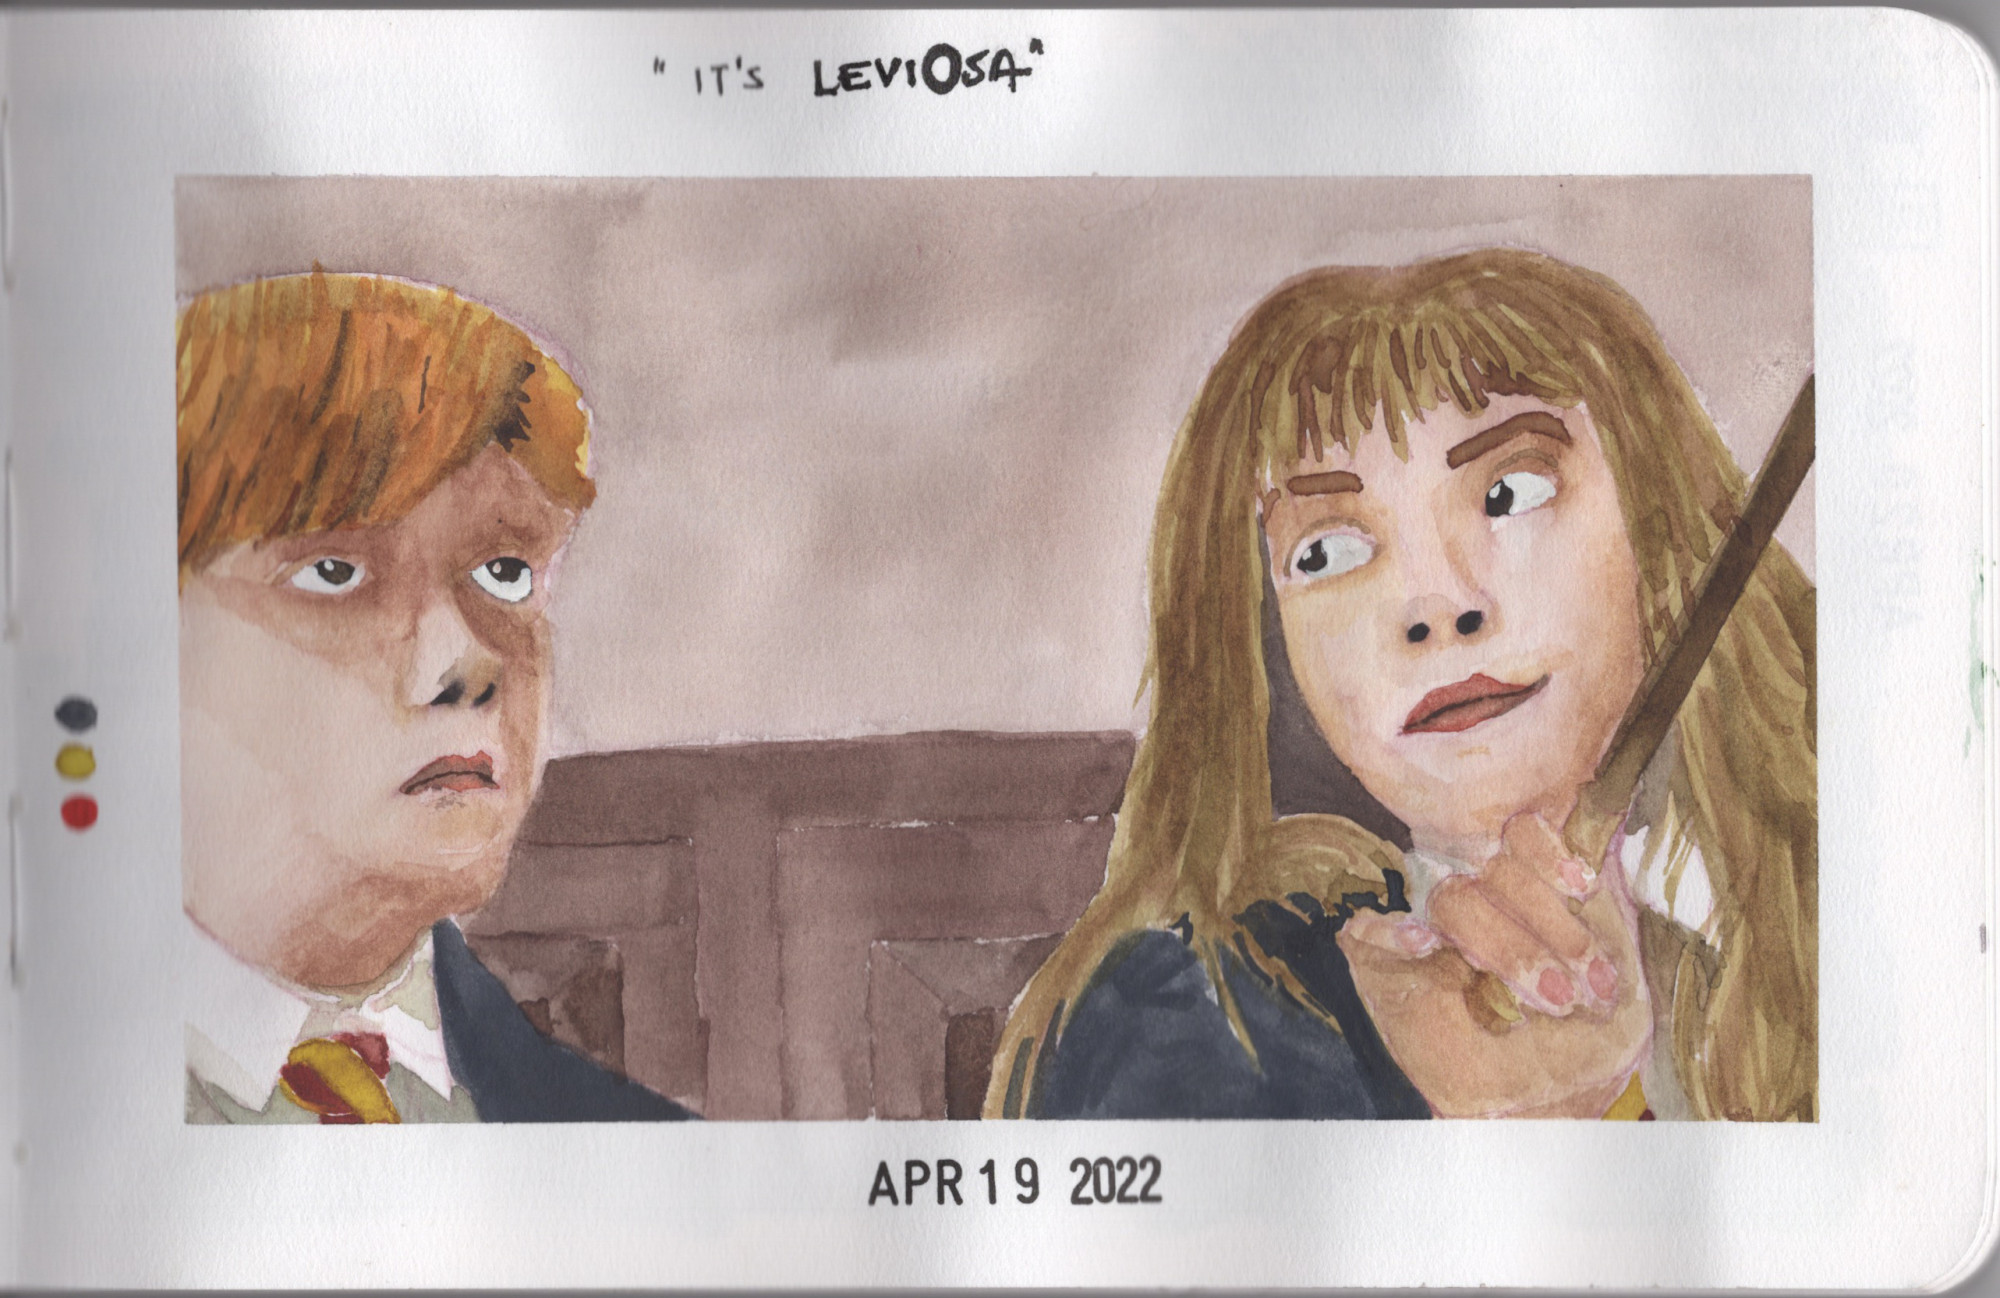 A watercolor painting of a scene from Harry Potter where Hermione demonstrates how to use Wingardium Leviosa in front of a dismayed looking Ron